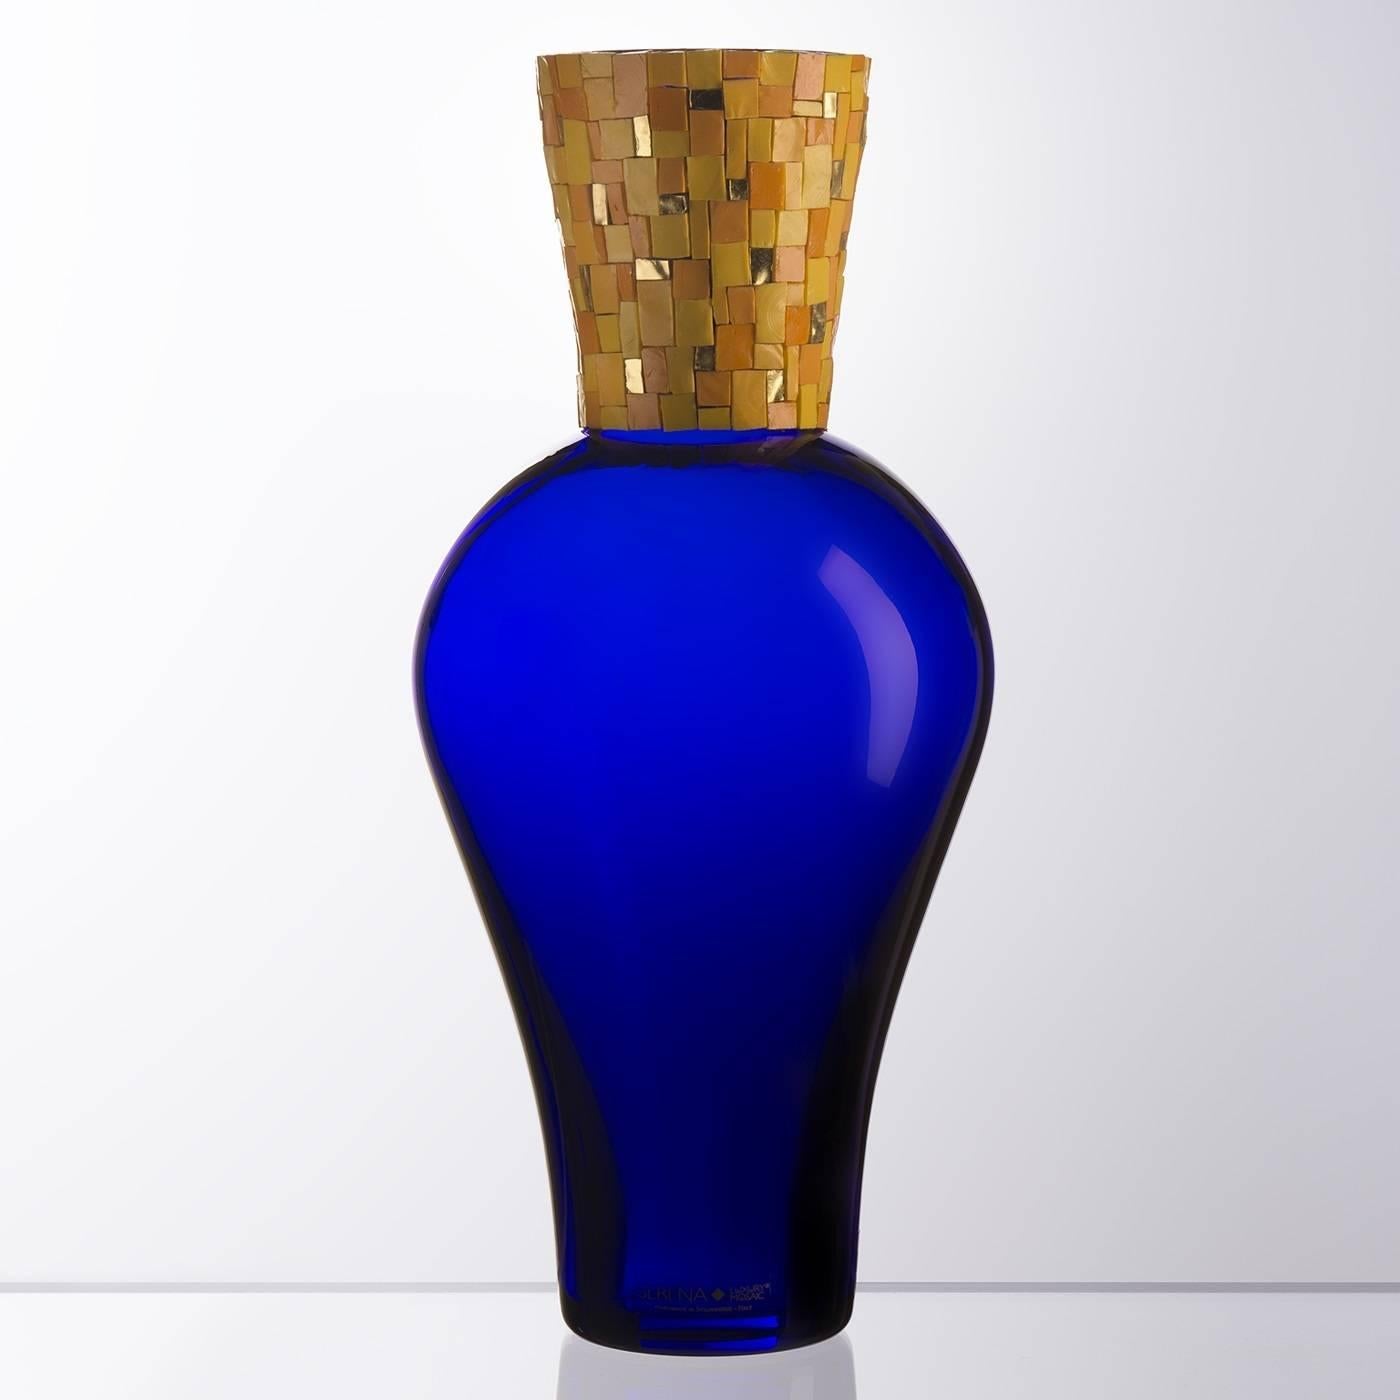 The decorative mosaic accent of this vase is a fine example of the masterful craftsmanship and artistic elegance that is unique to Murano mouth-blown pieces. This striking vase features a sinuous body in an intense blue color that contrasts with the